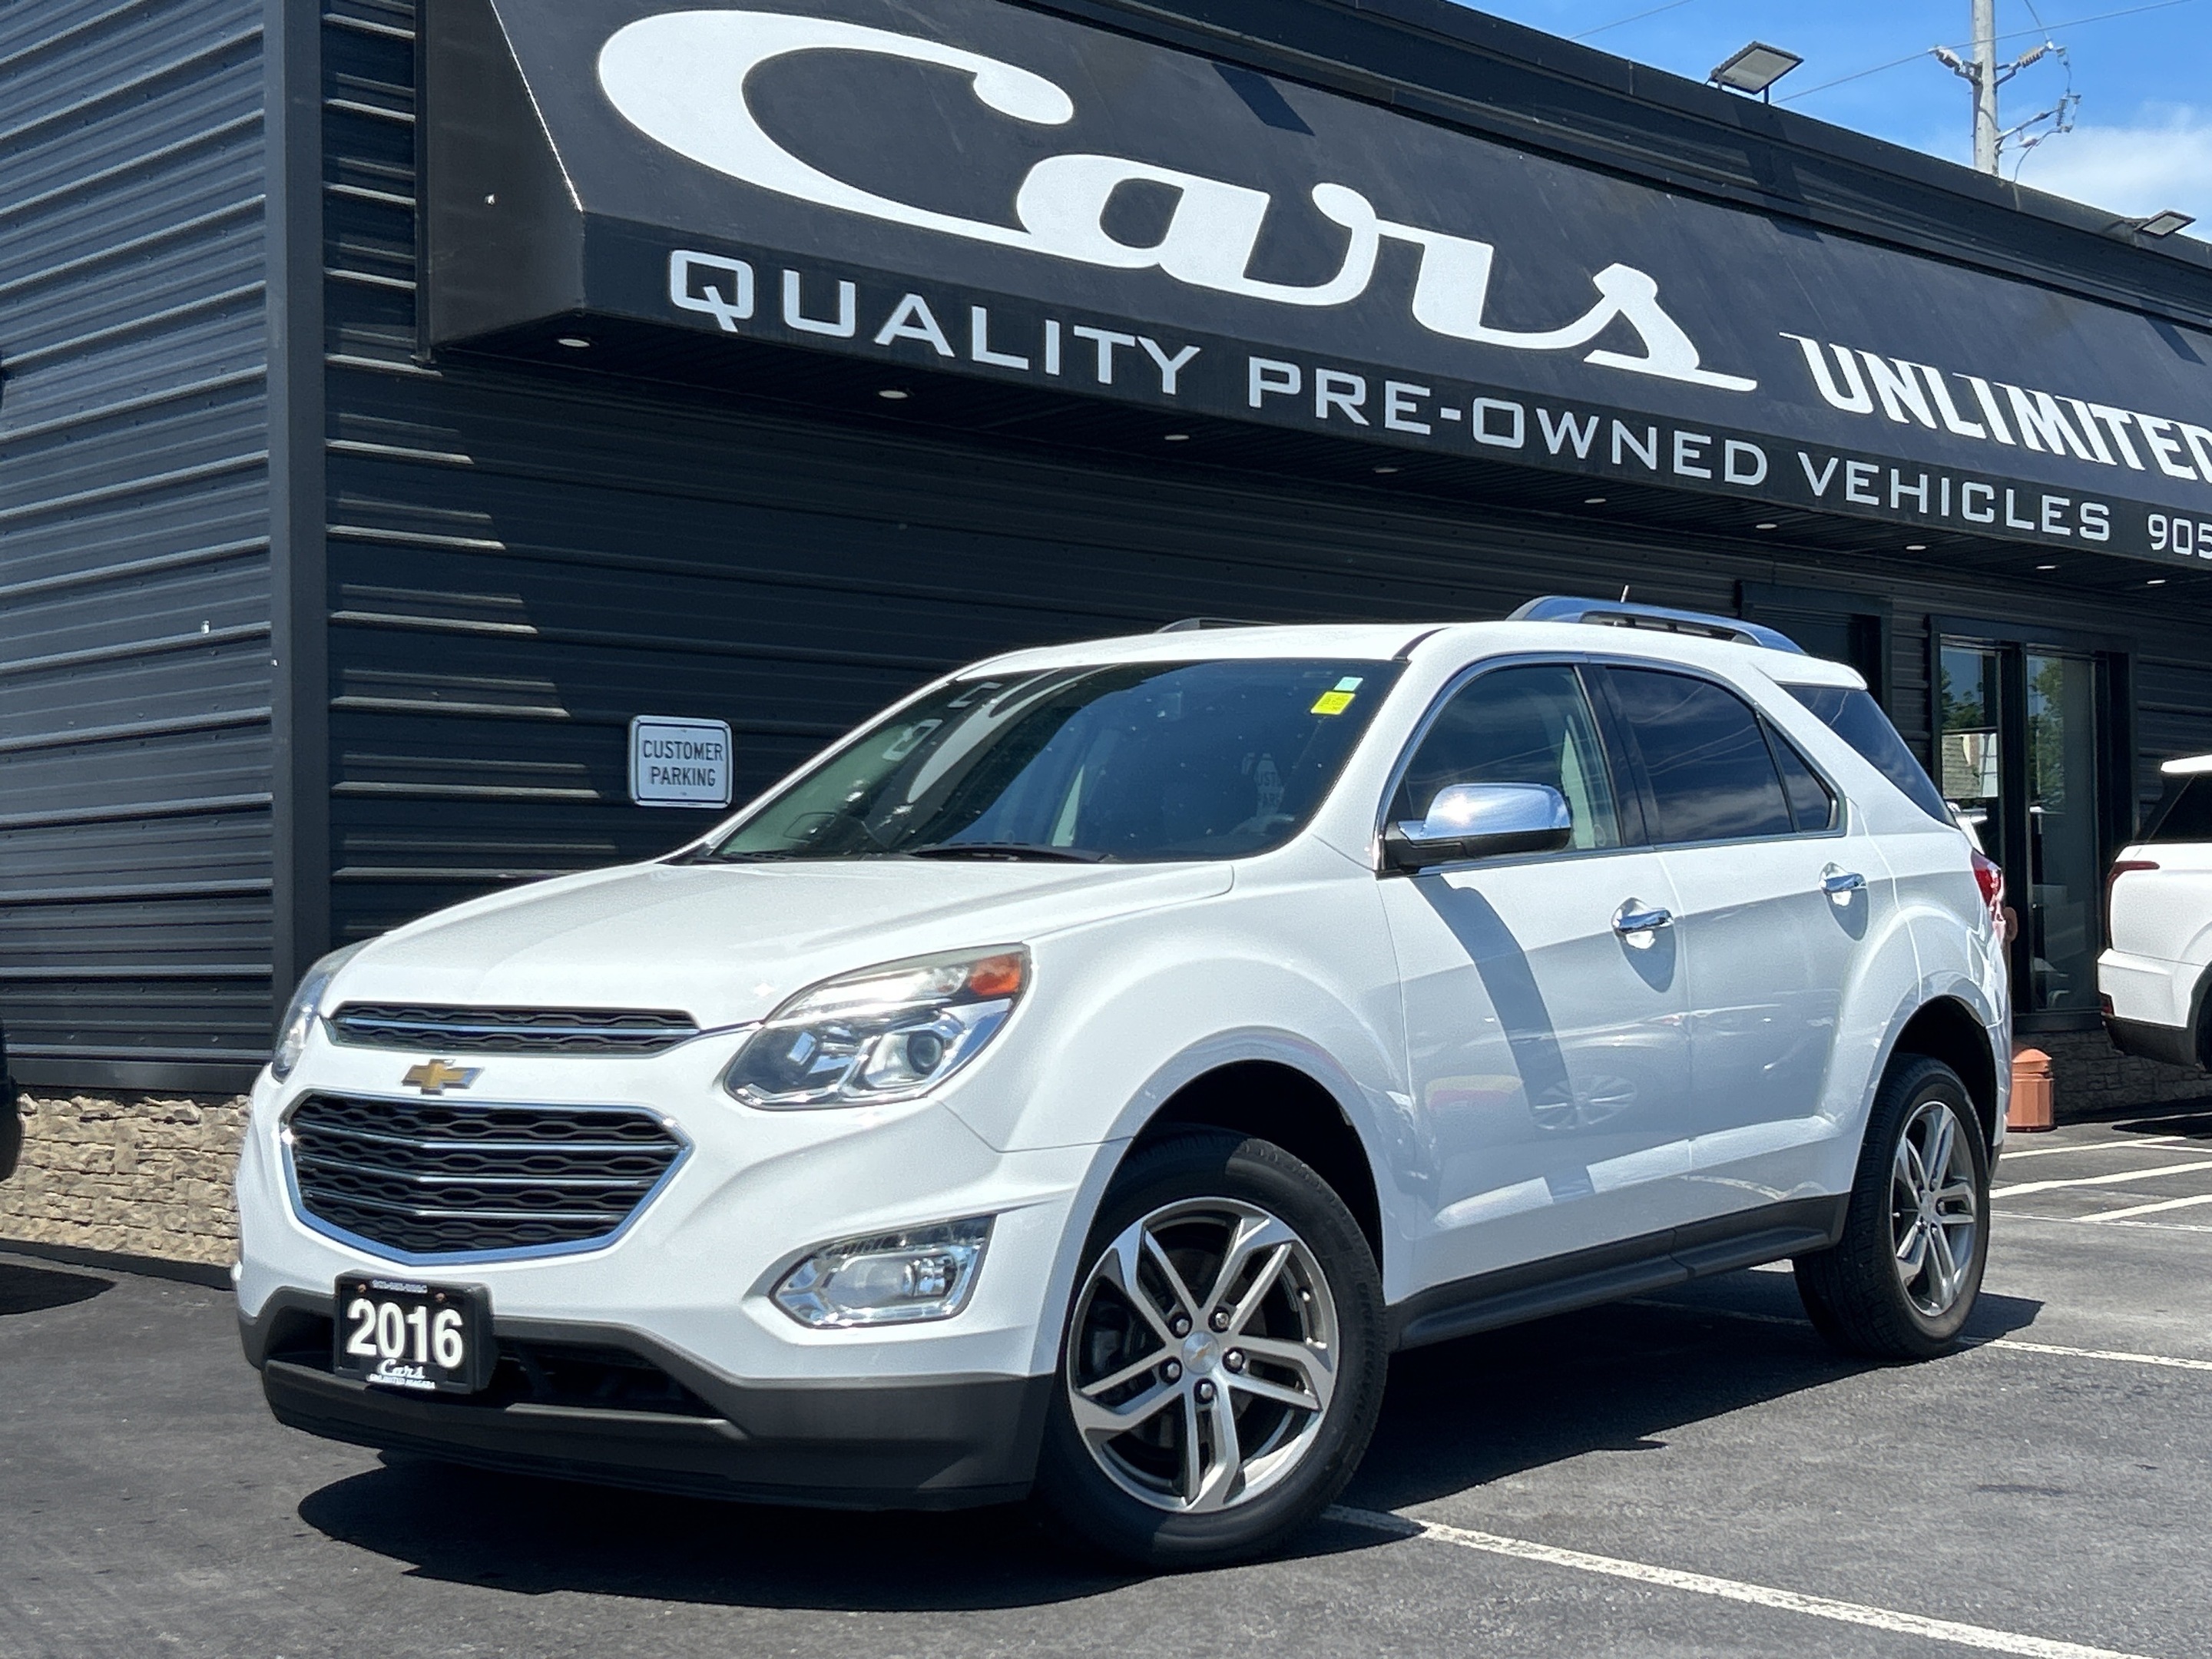 2016 Chevrolet Equinox LTZ/1 OWNER/NAVI/REMOTE/CAMERA/LOCALLY OWNED